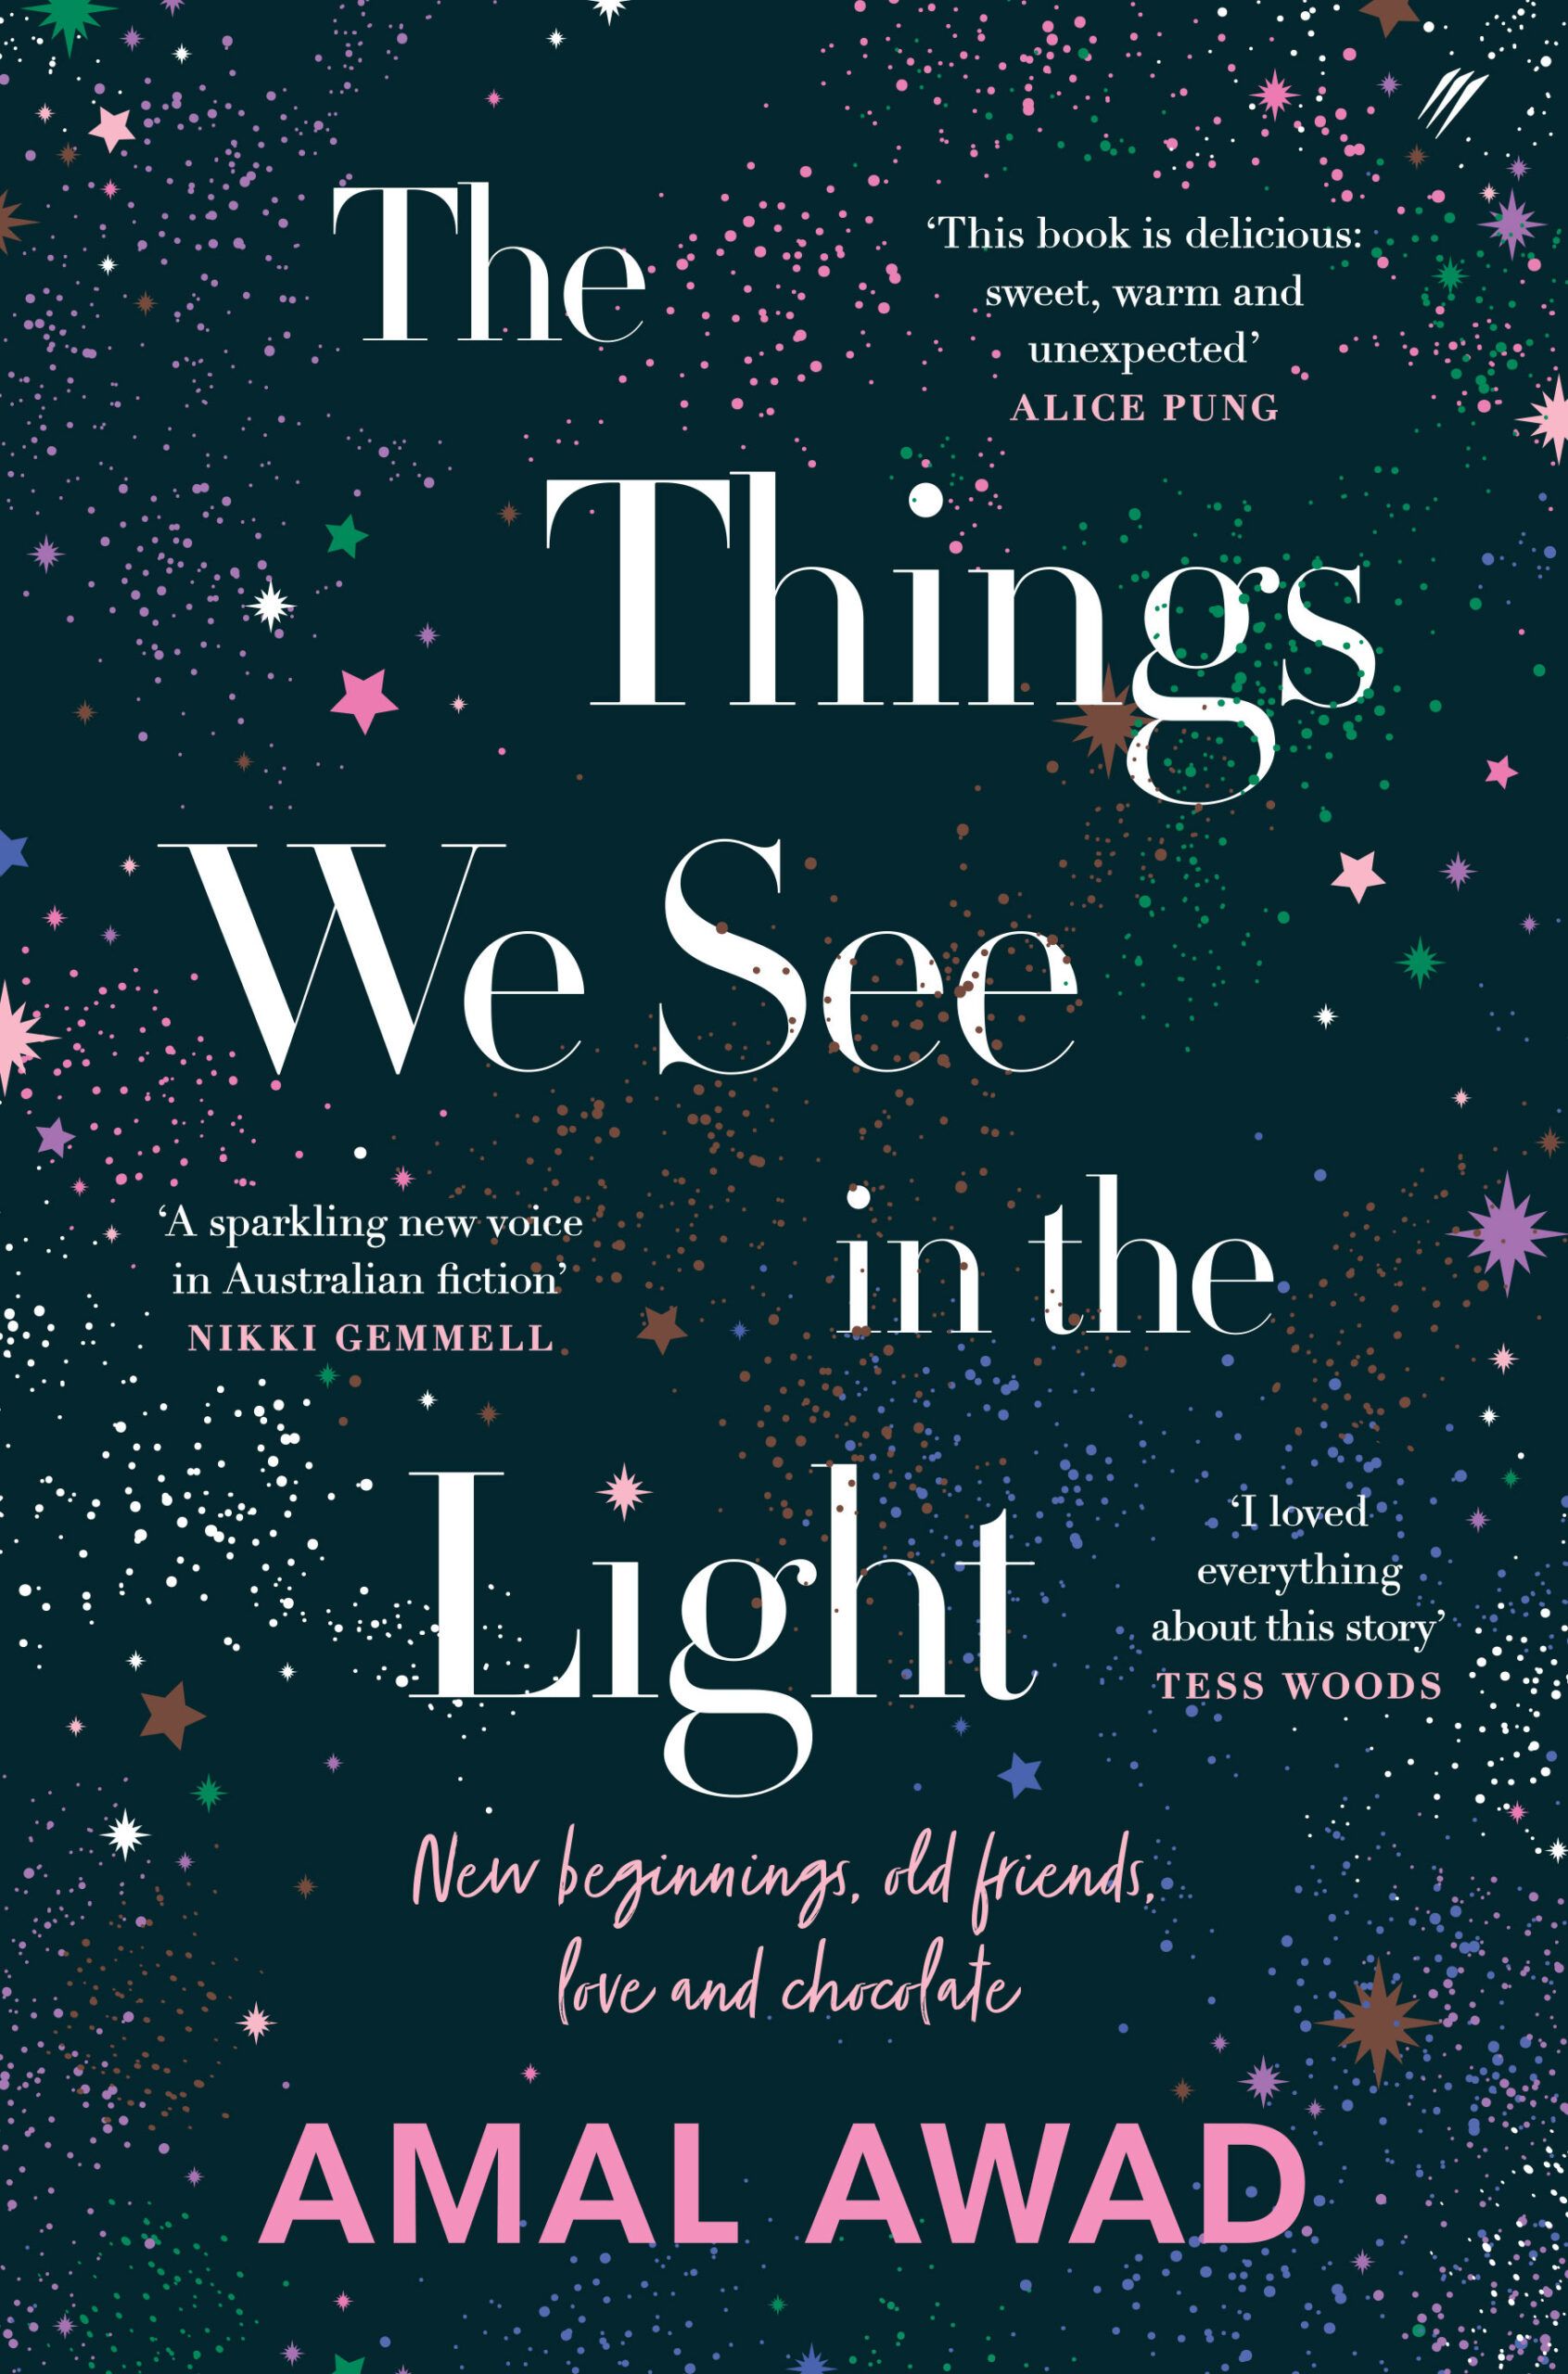 The front cover of Amal Awad's new book, 'The Things We See in the Light'